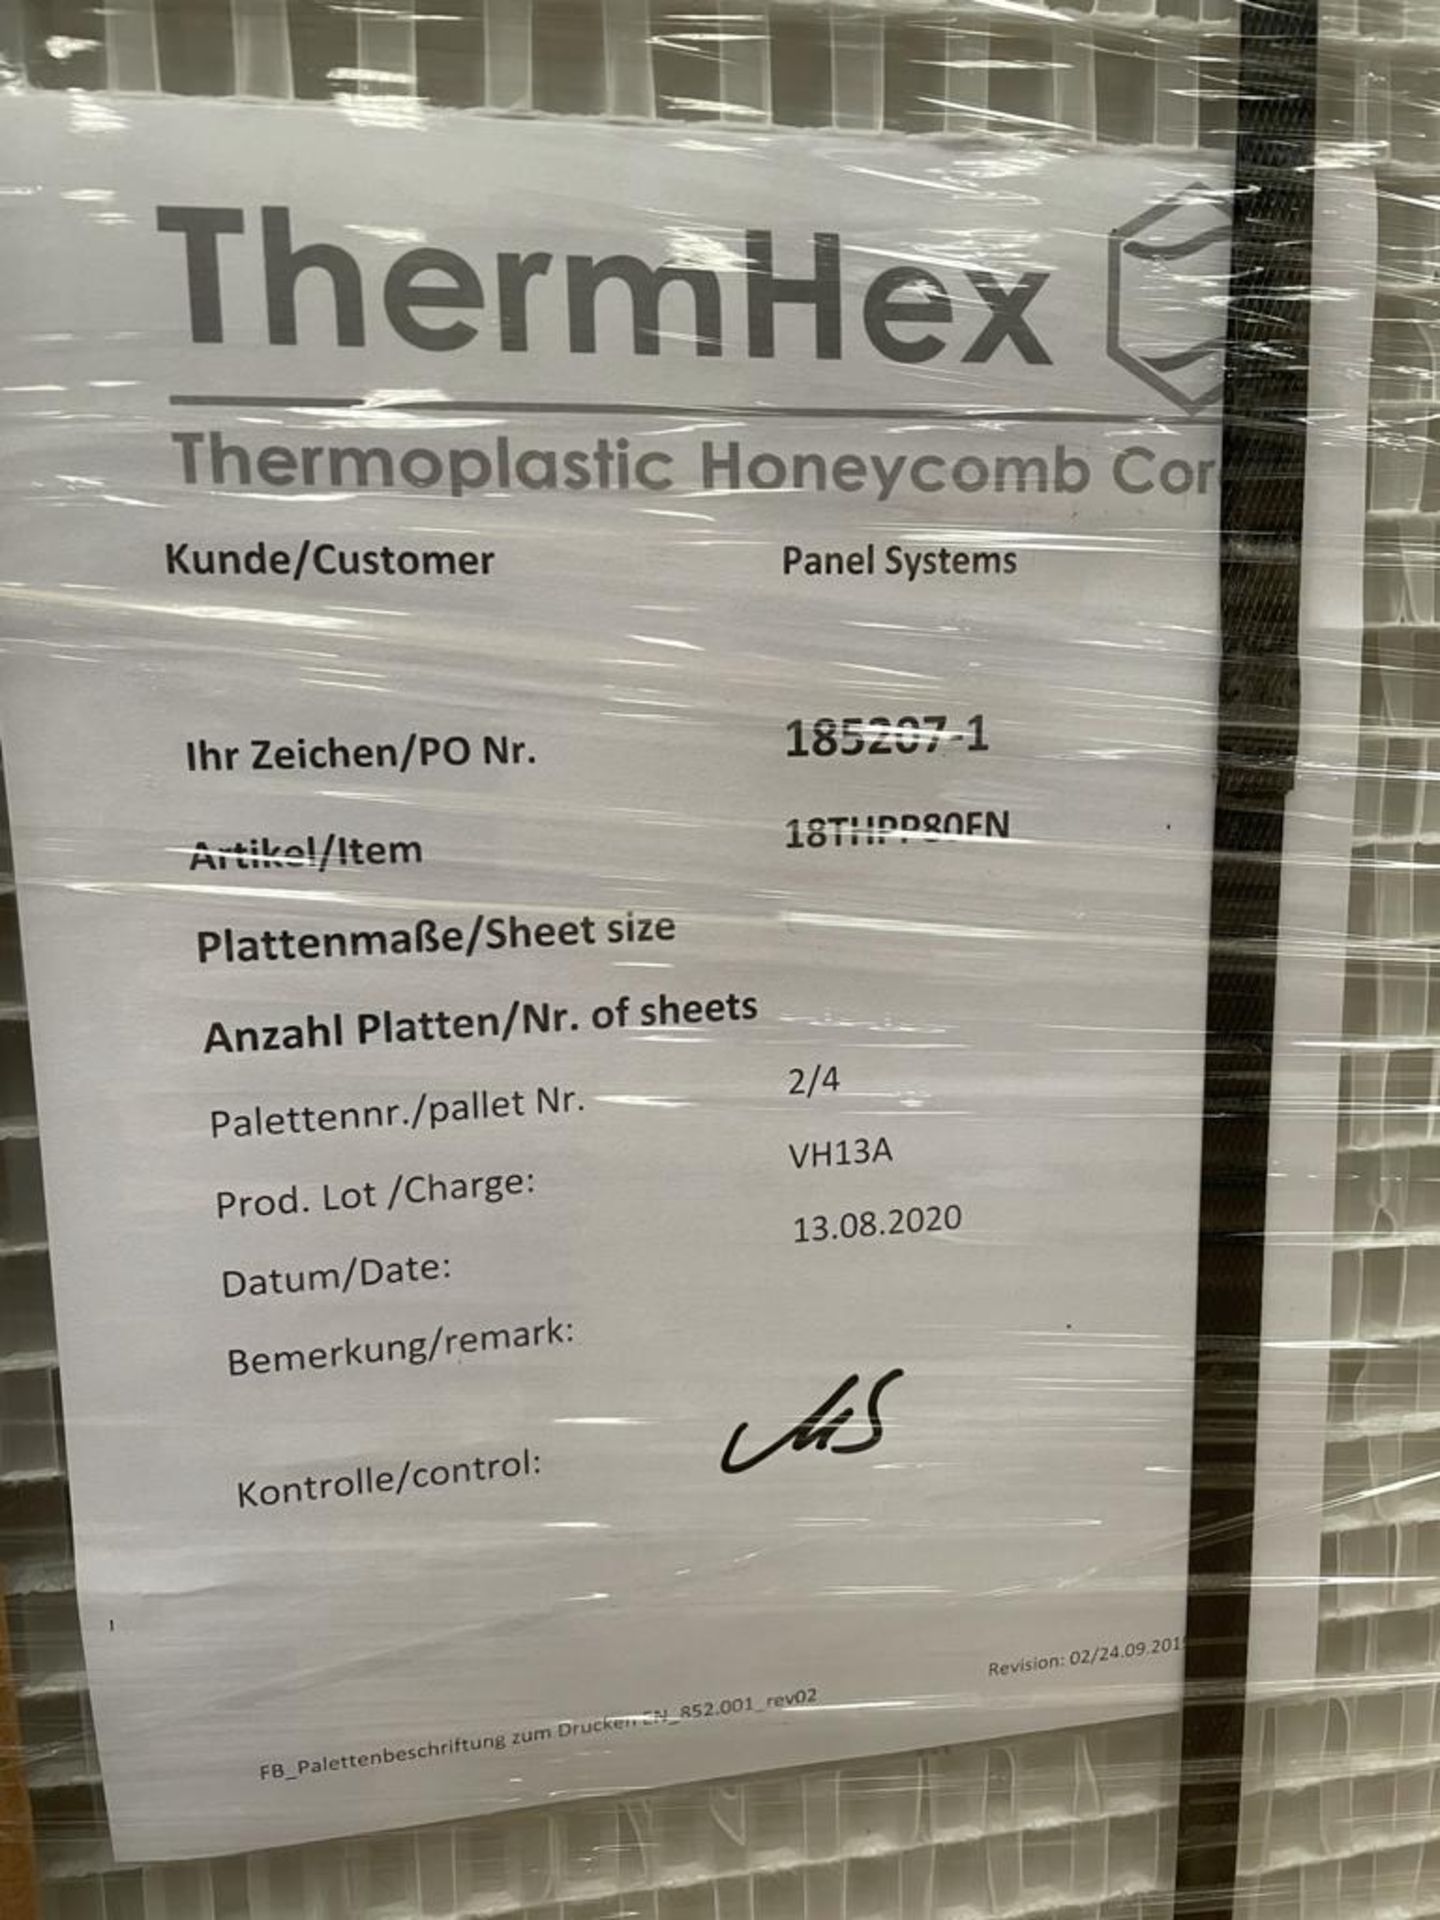 50 x ThermHex Thermoplastic Honeycomb Core Panels - Size 3175 x 1210 x 18mm - New Stock - - Image 2 of 8